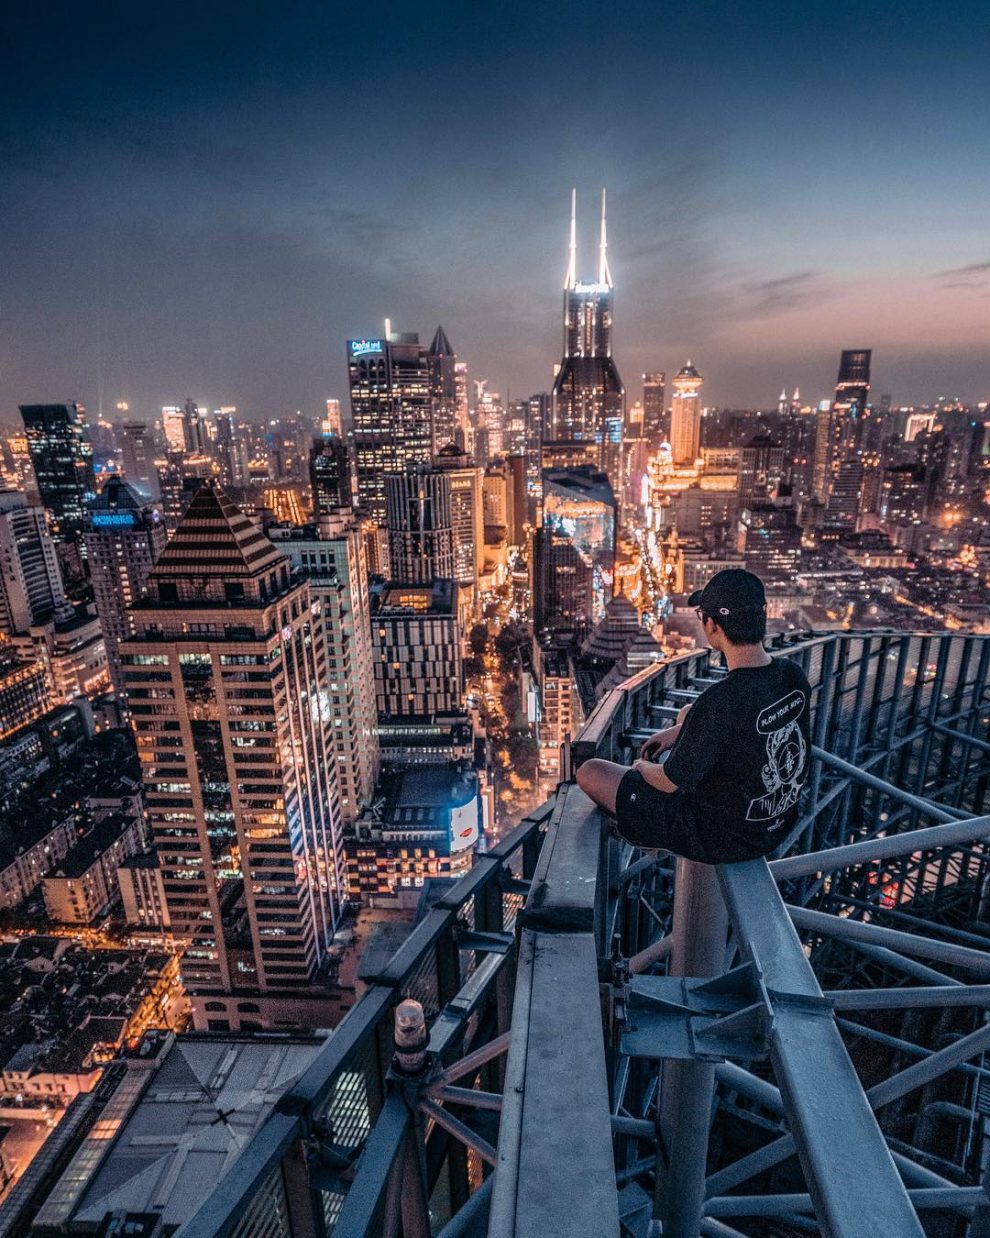 Daredevil Photographer Captures Outstanding Cityscape Views Above The ...